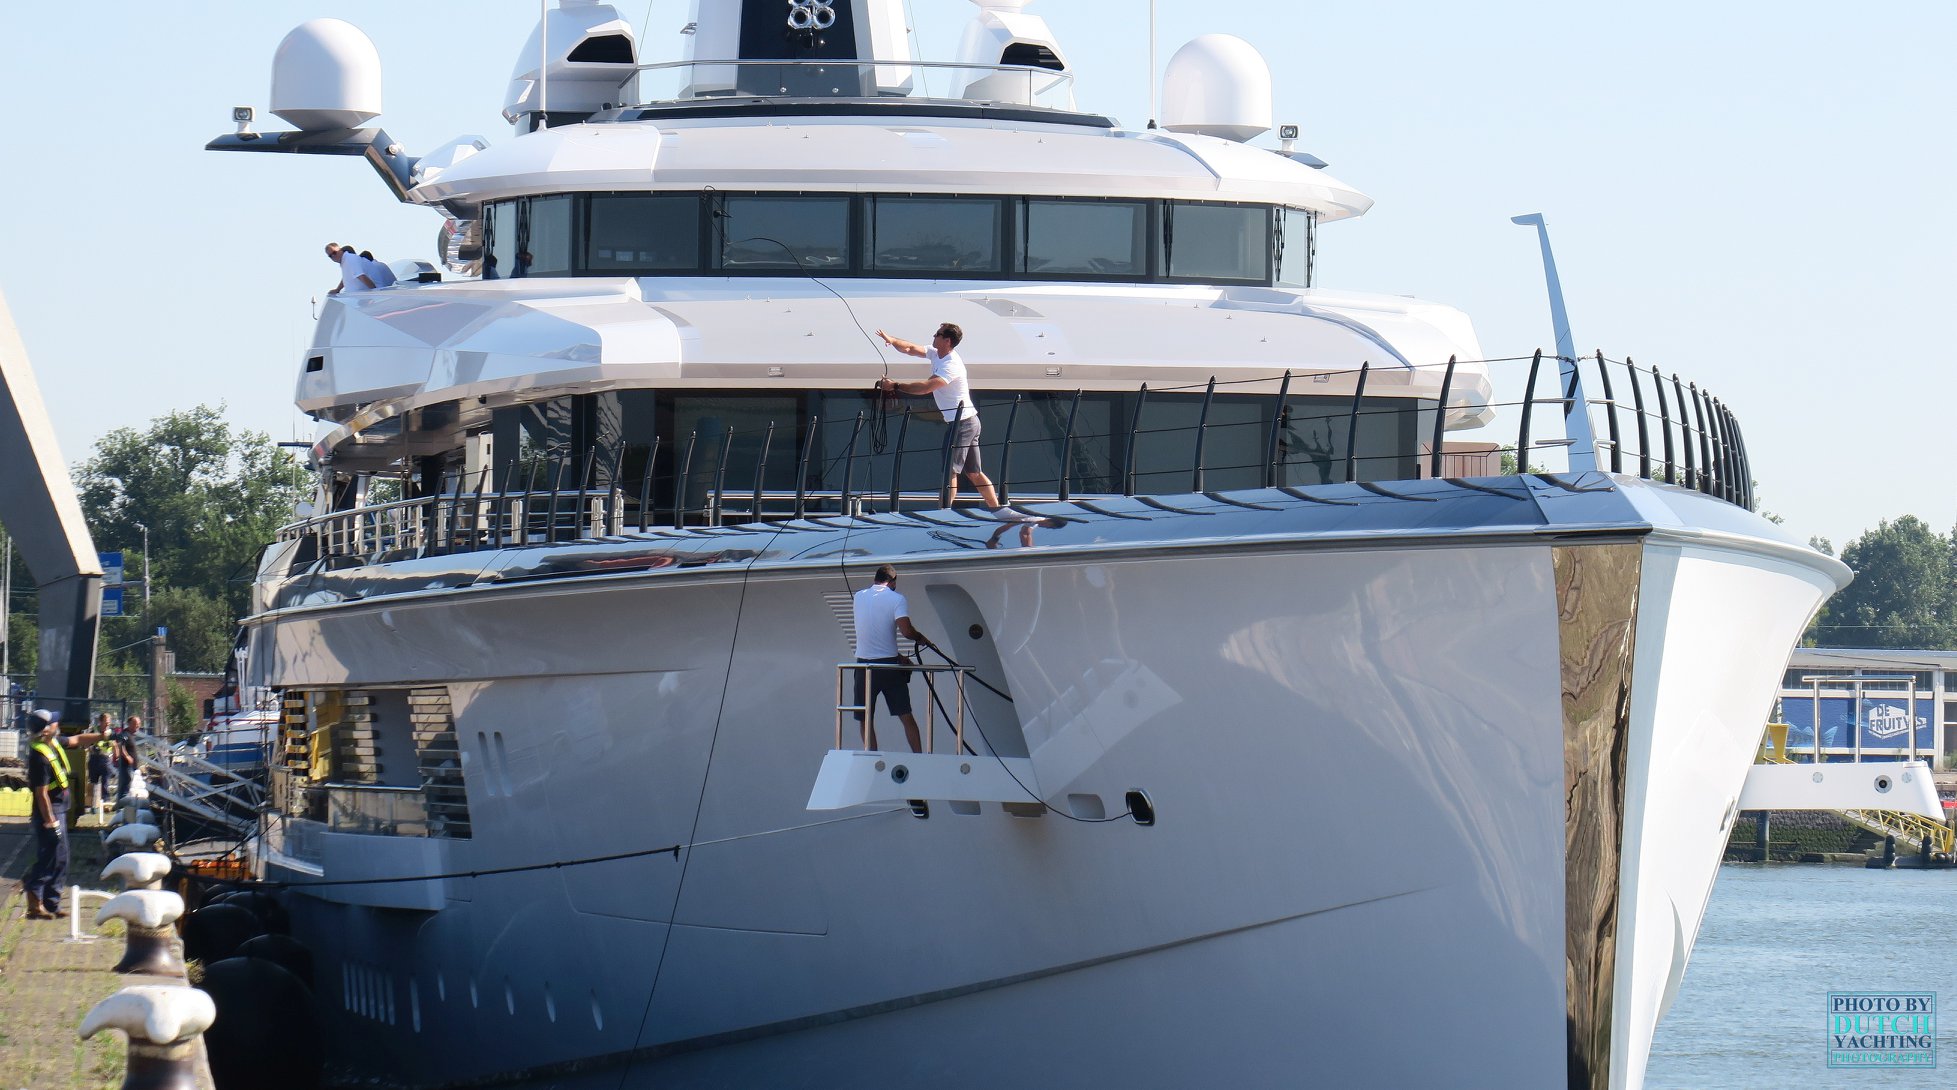 Nfl Team Owner S 109m Superyacht Bravo Eugenia Spotted In